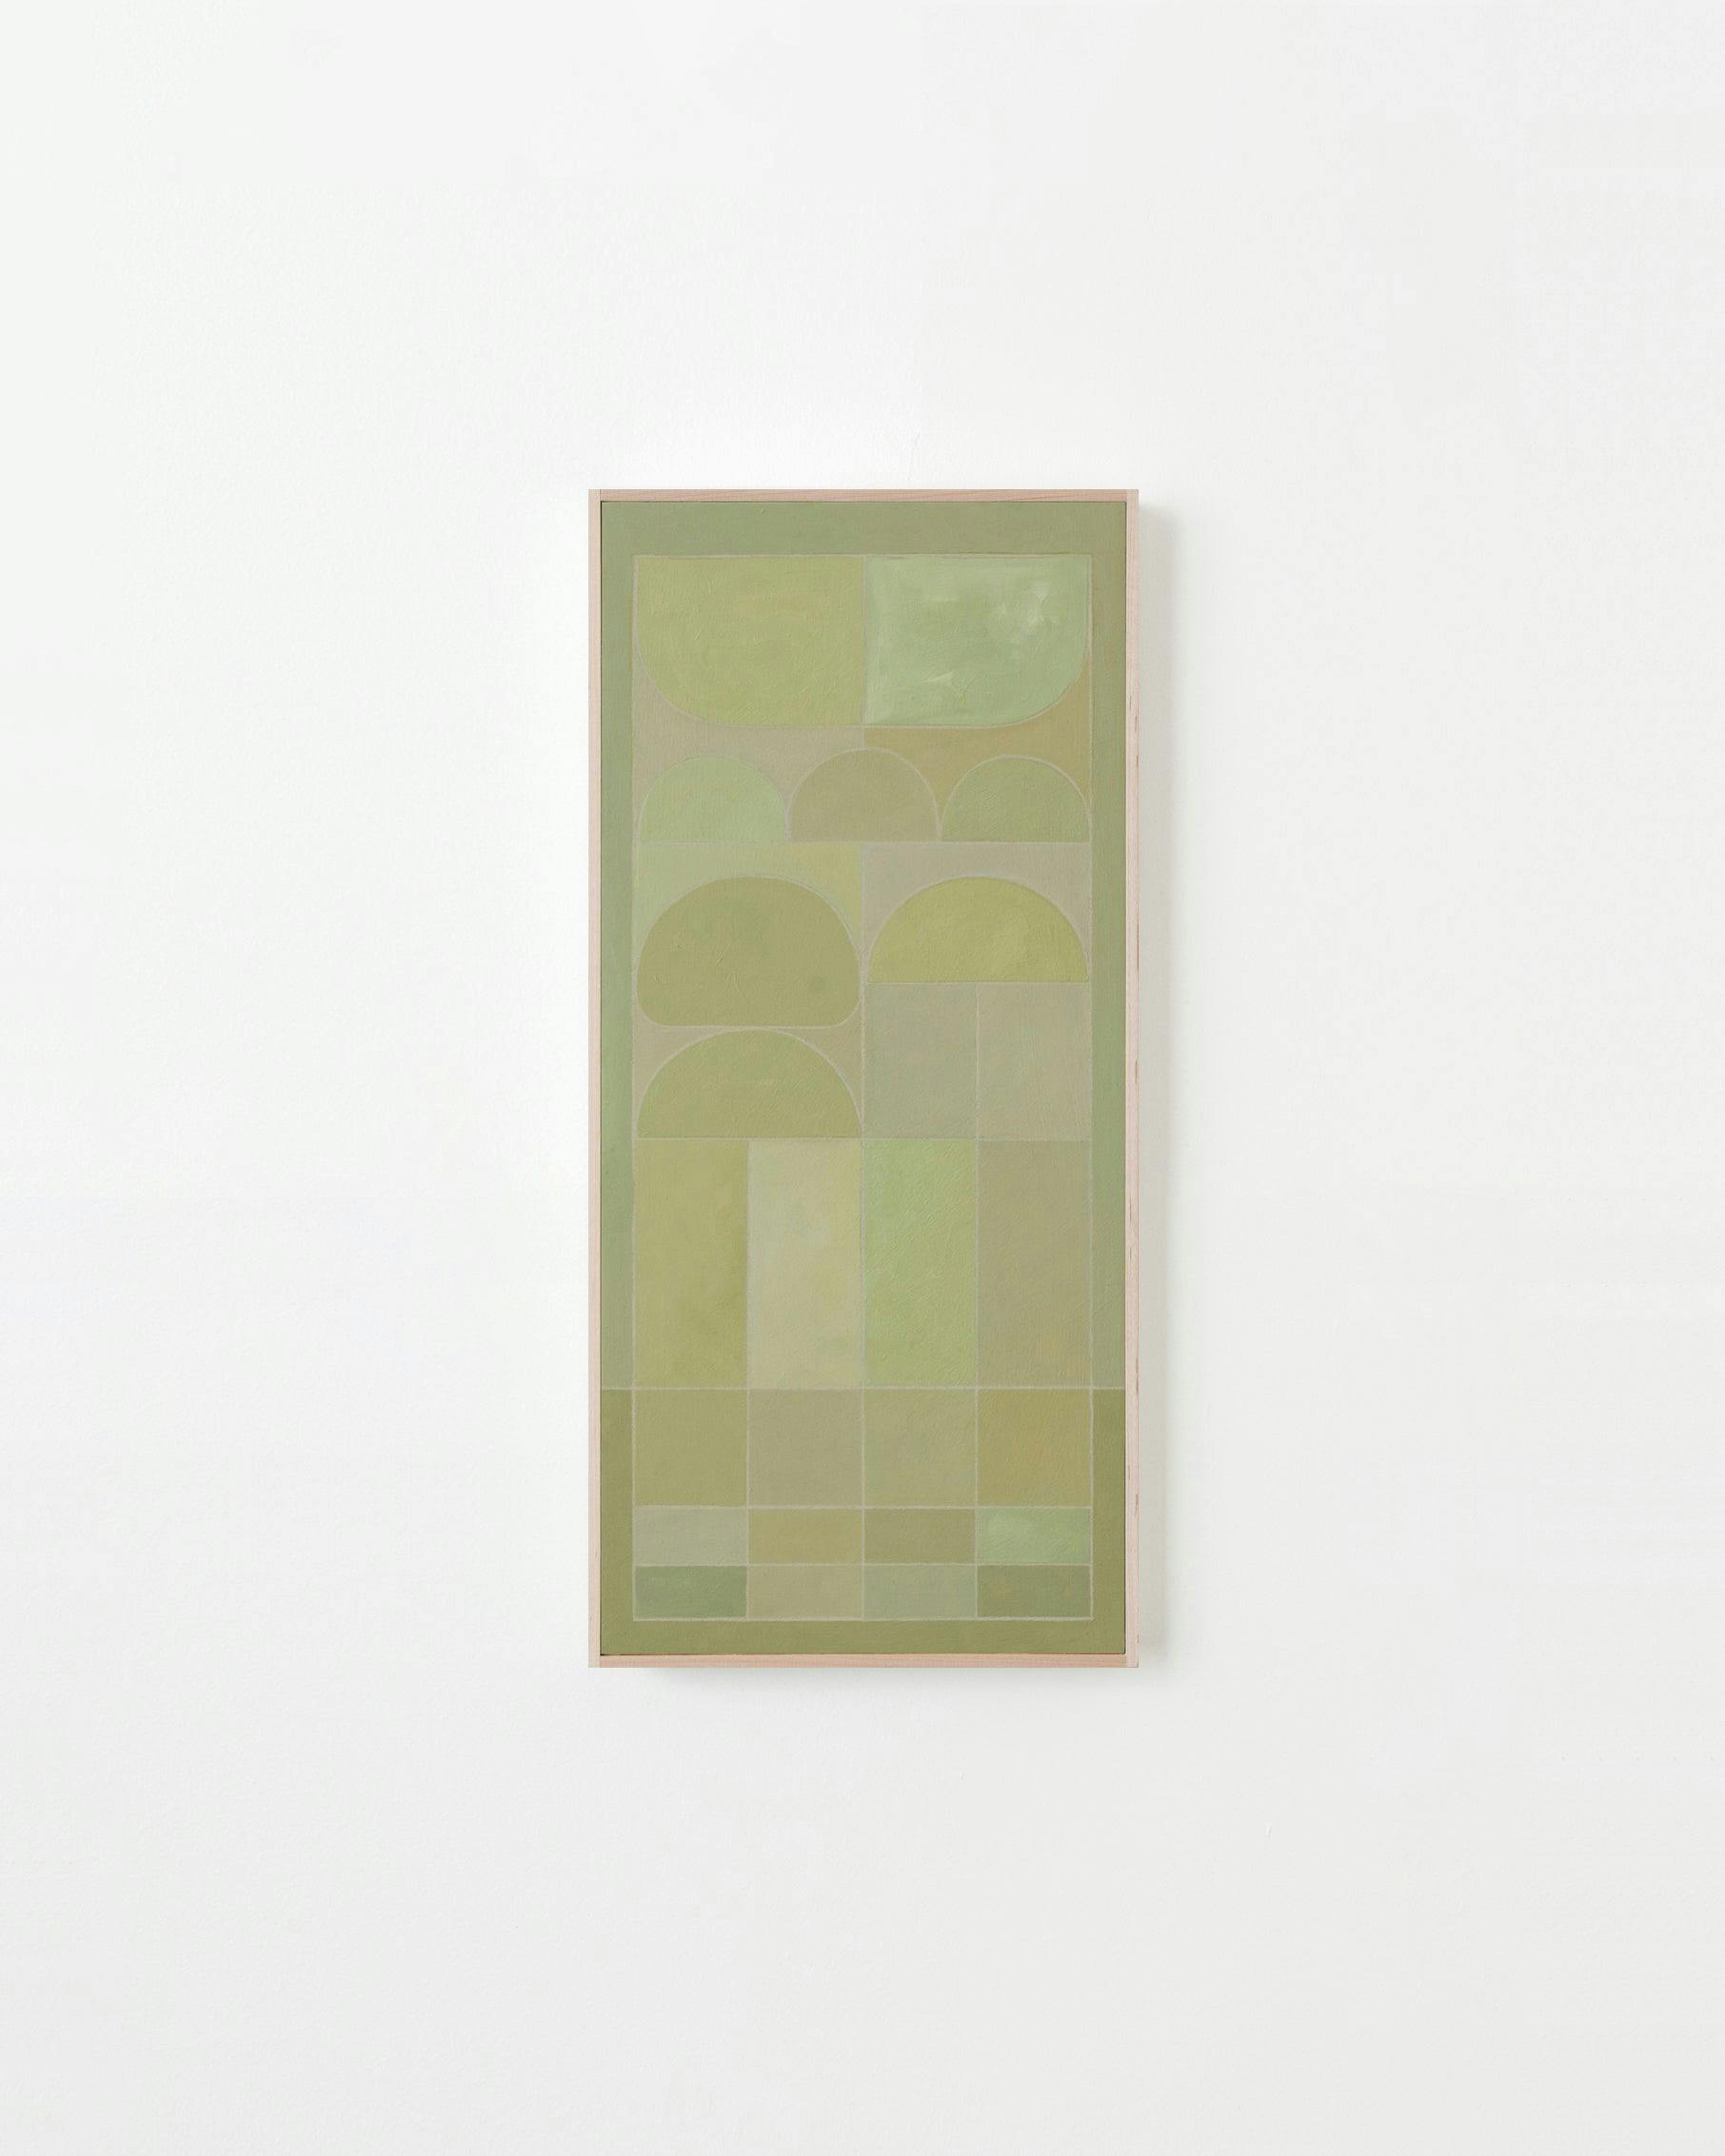 Painting by Carla Weeks titled "Stained Glass Study in Green 42".